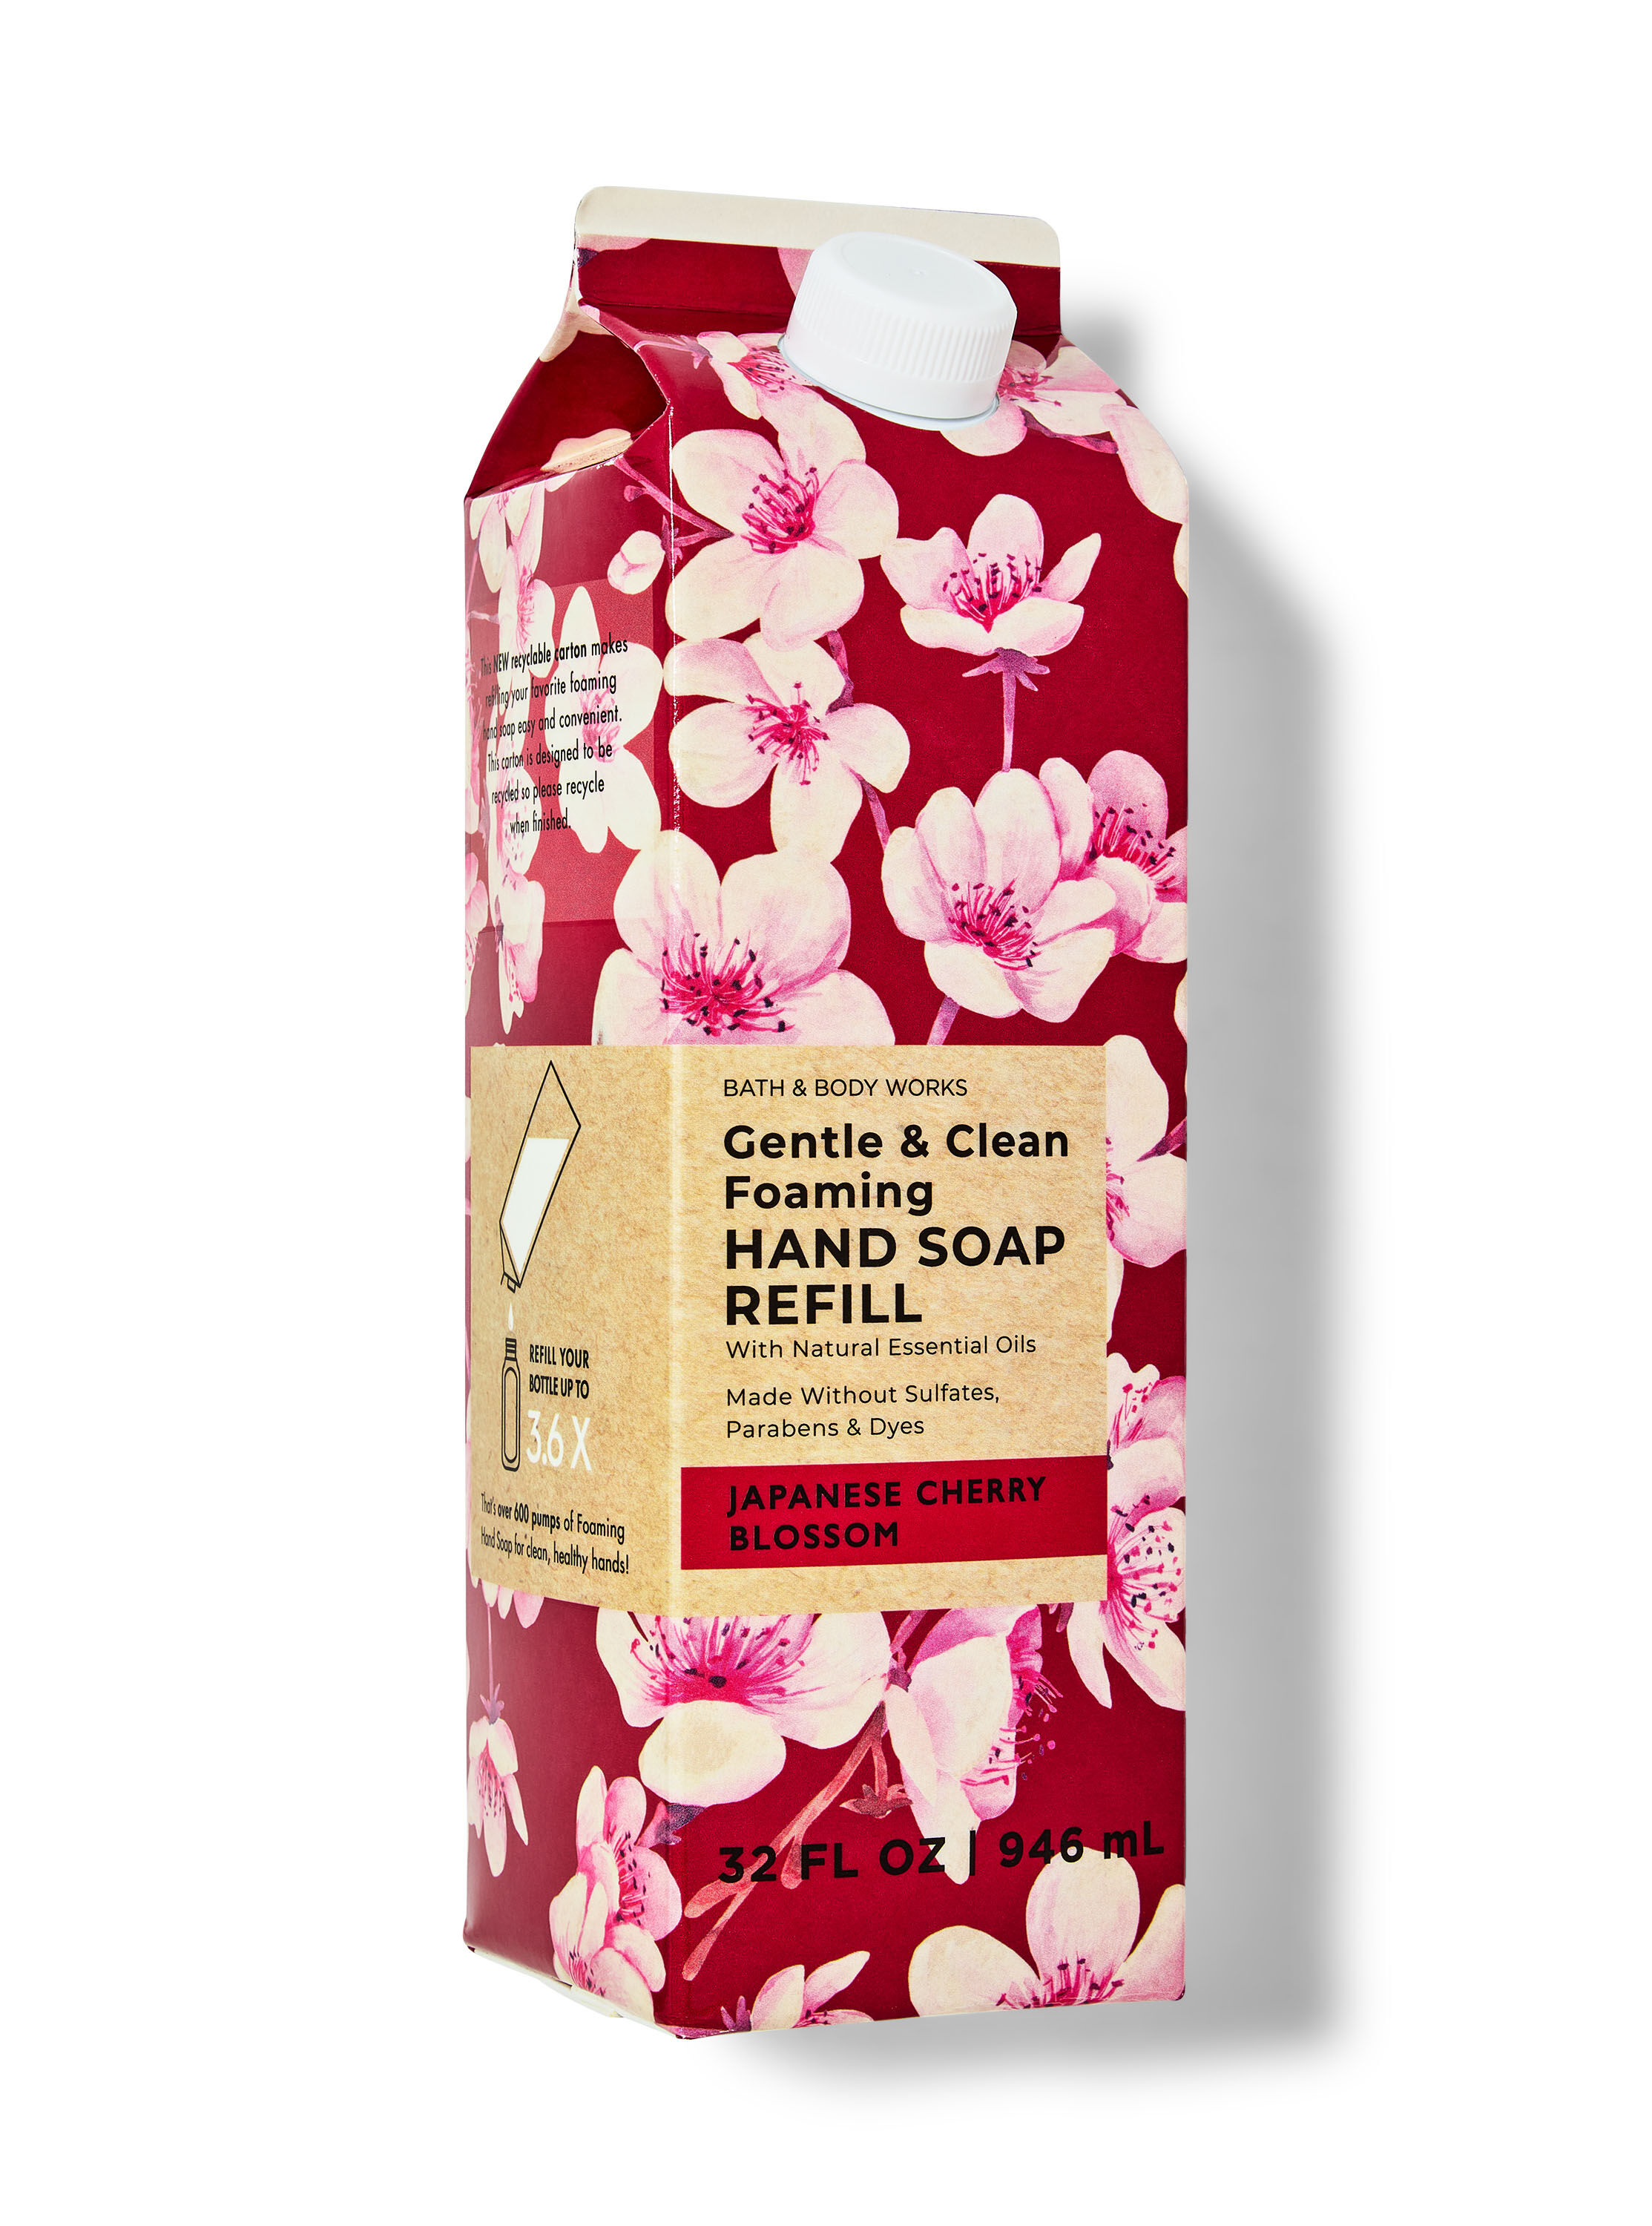 Japanese Cherry Blossom Gentle & Clean Foaming Hand Soap Refill